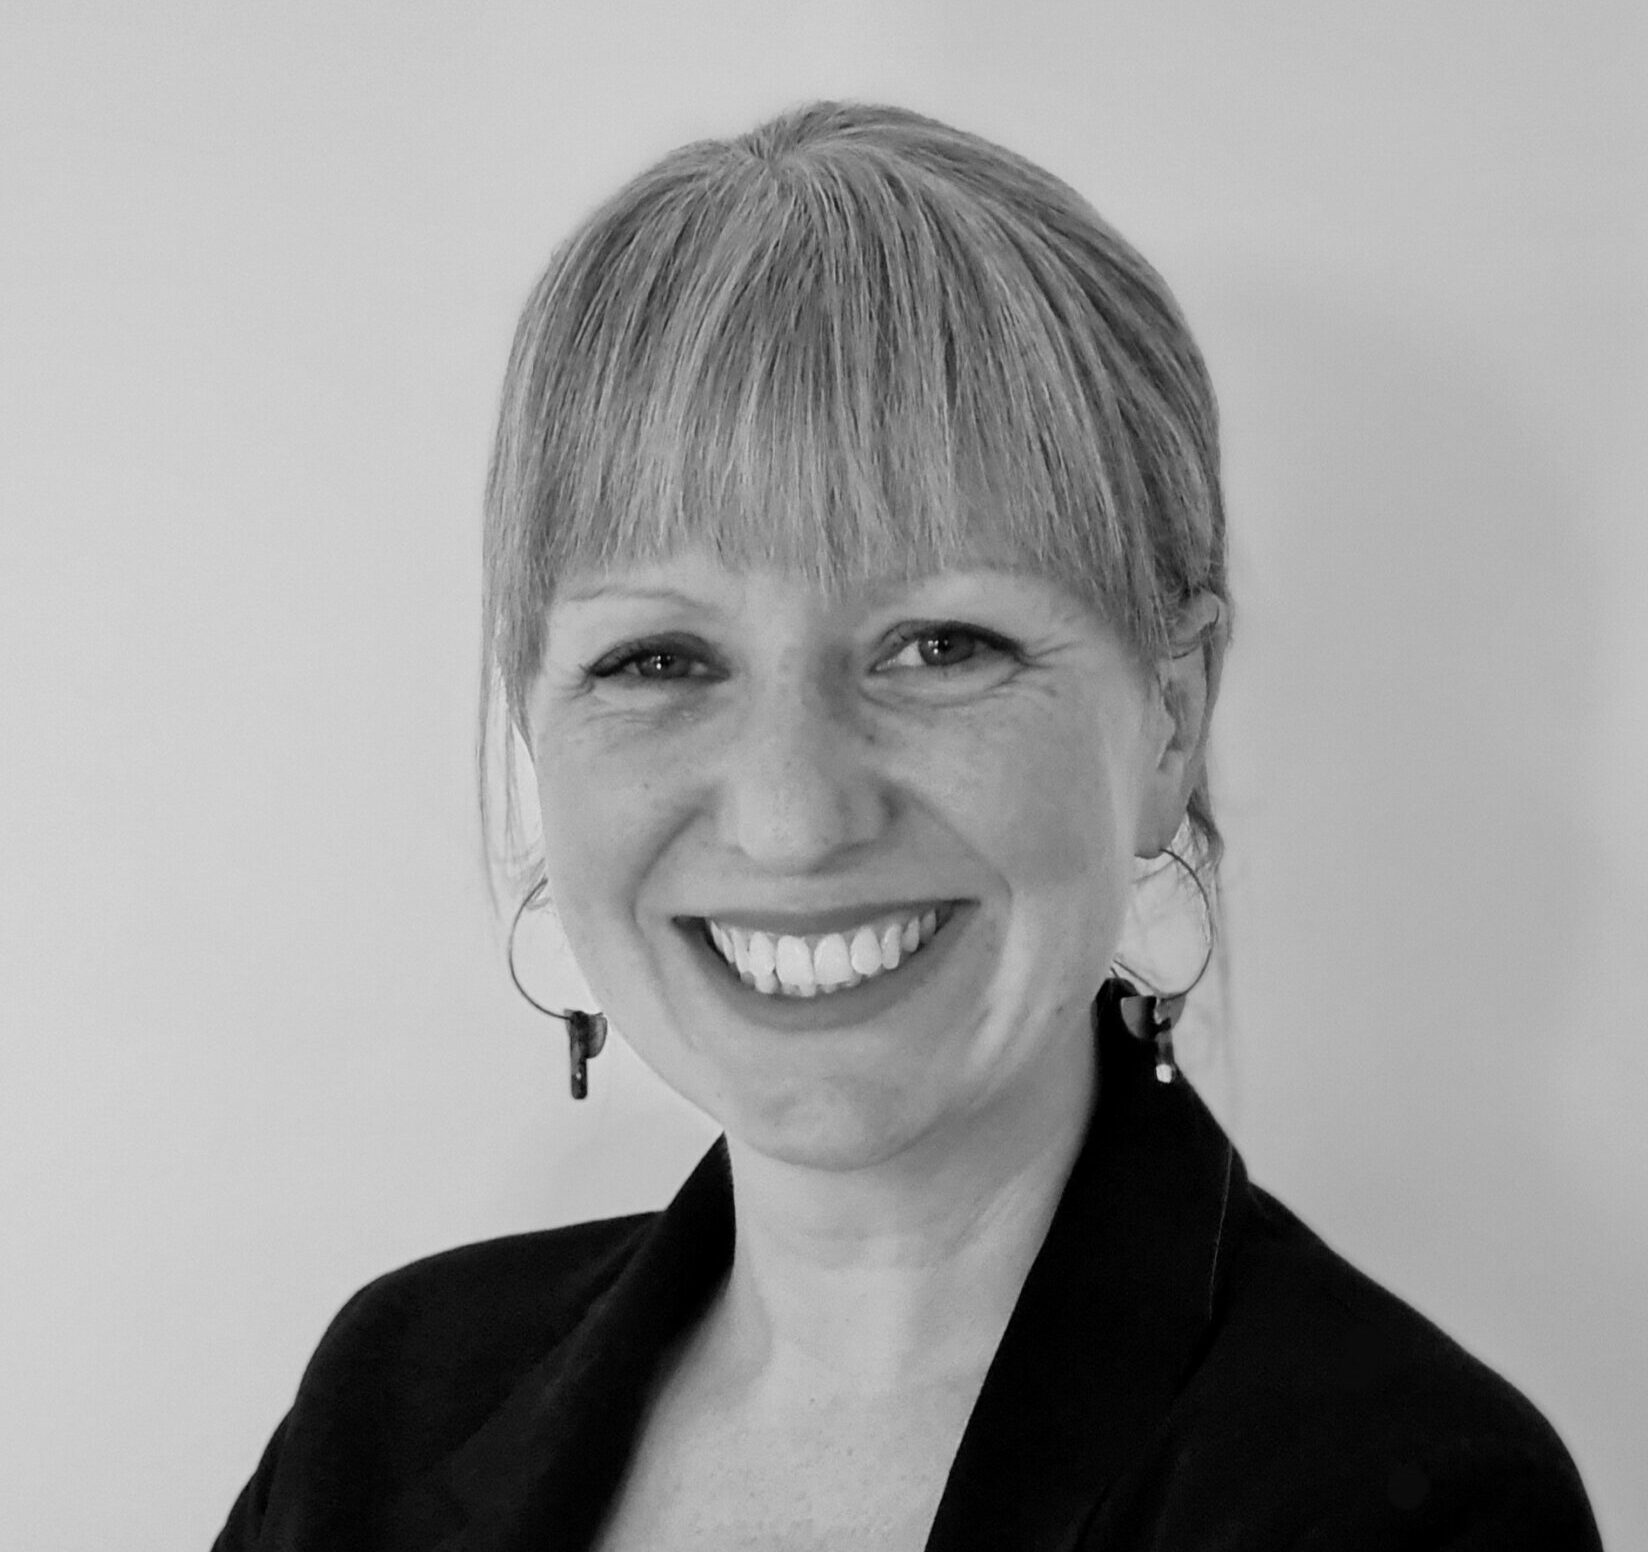 Headshot of Lizzie Kenyon, our CEO, in black and white